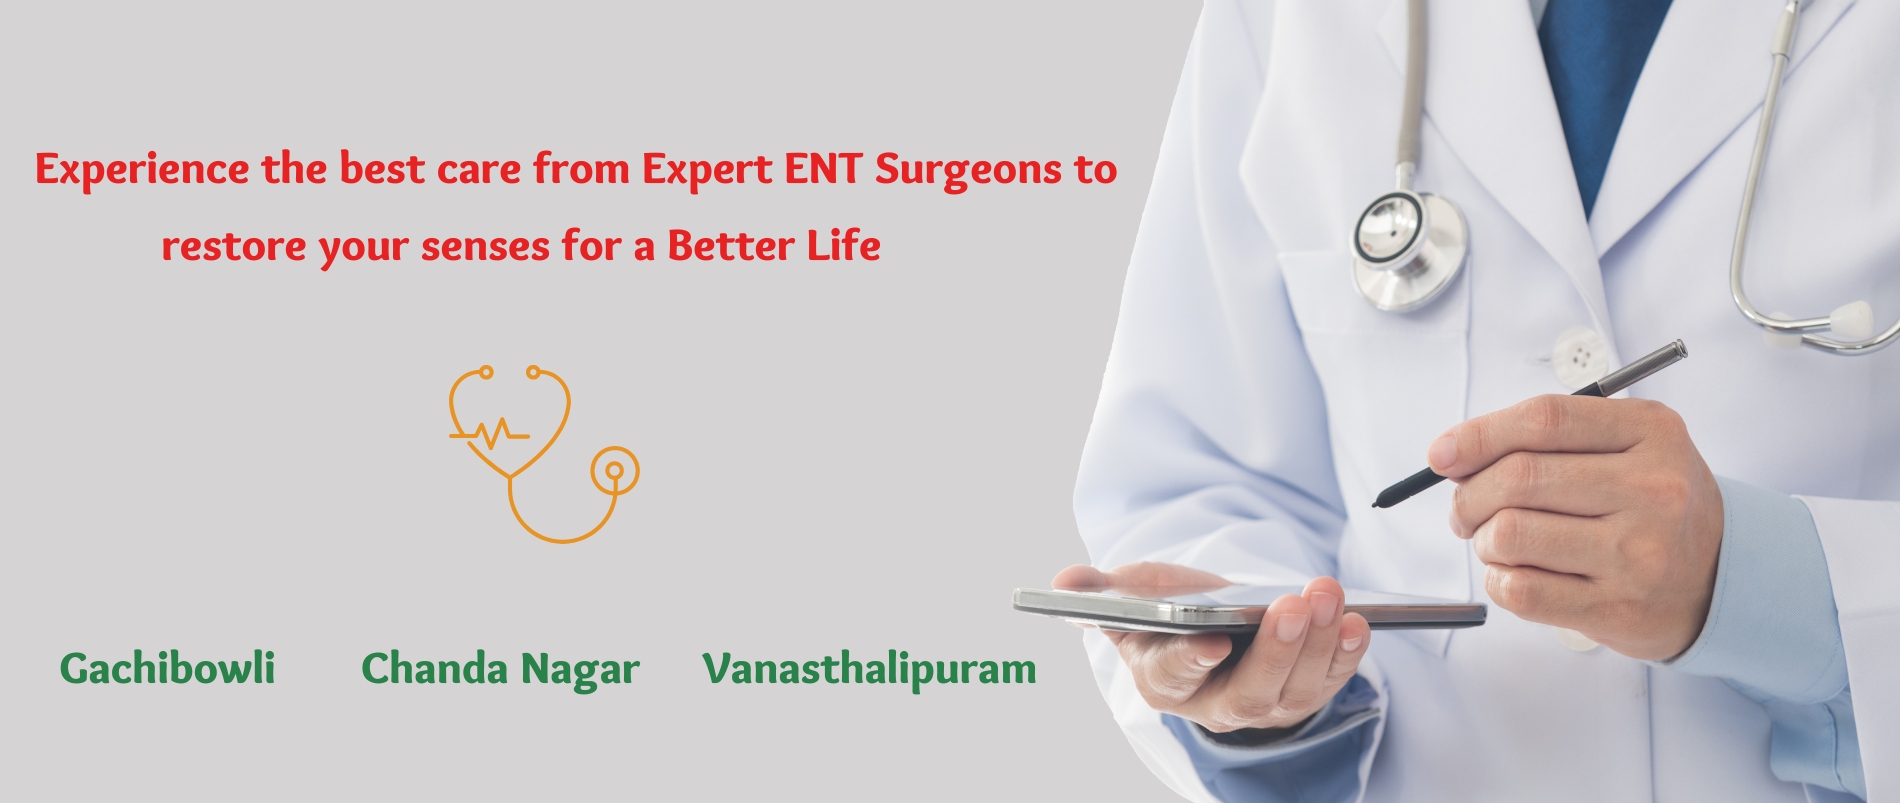 ent specialist doctors in hyderbad